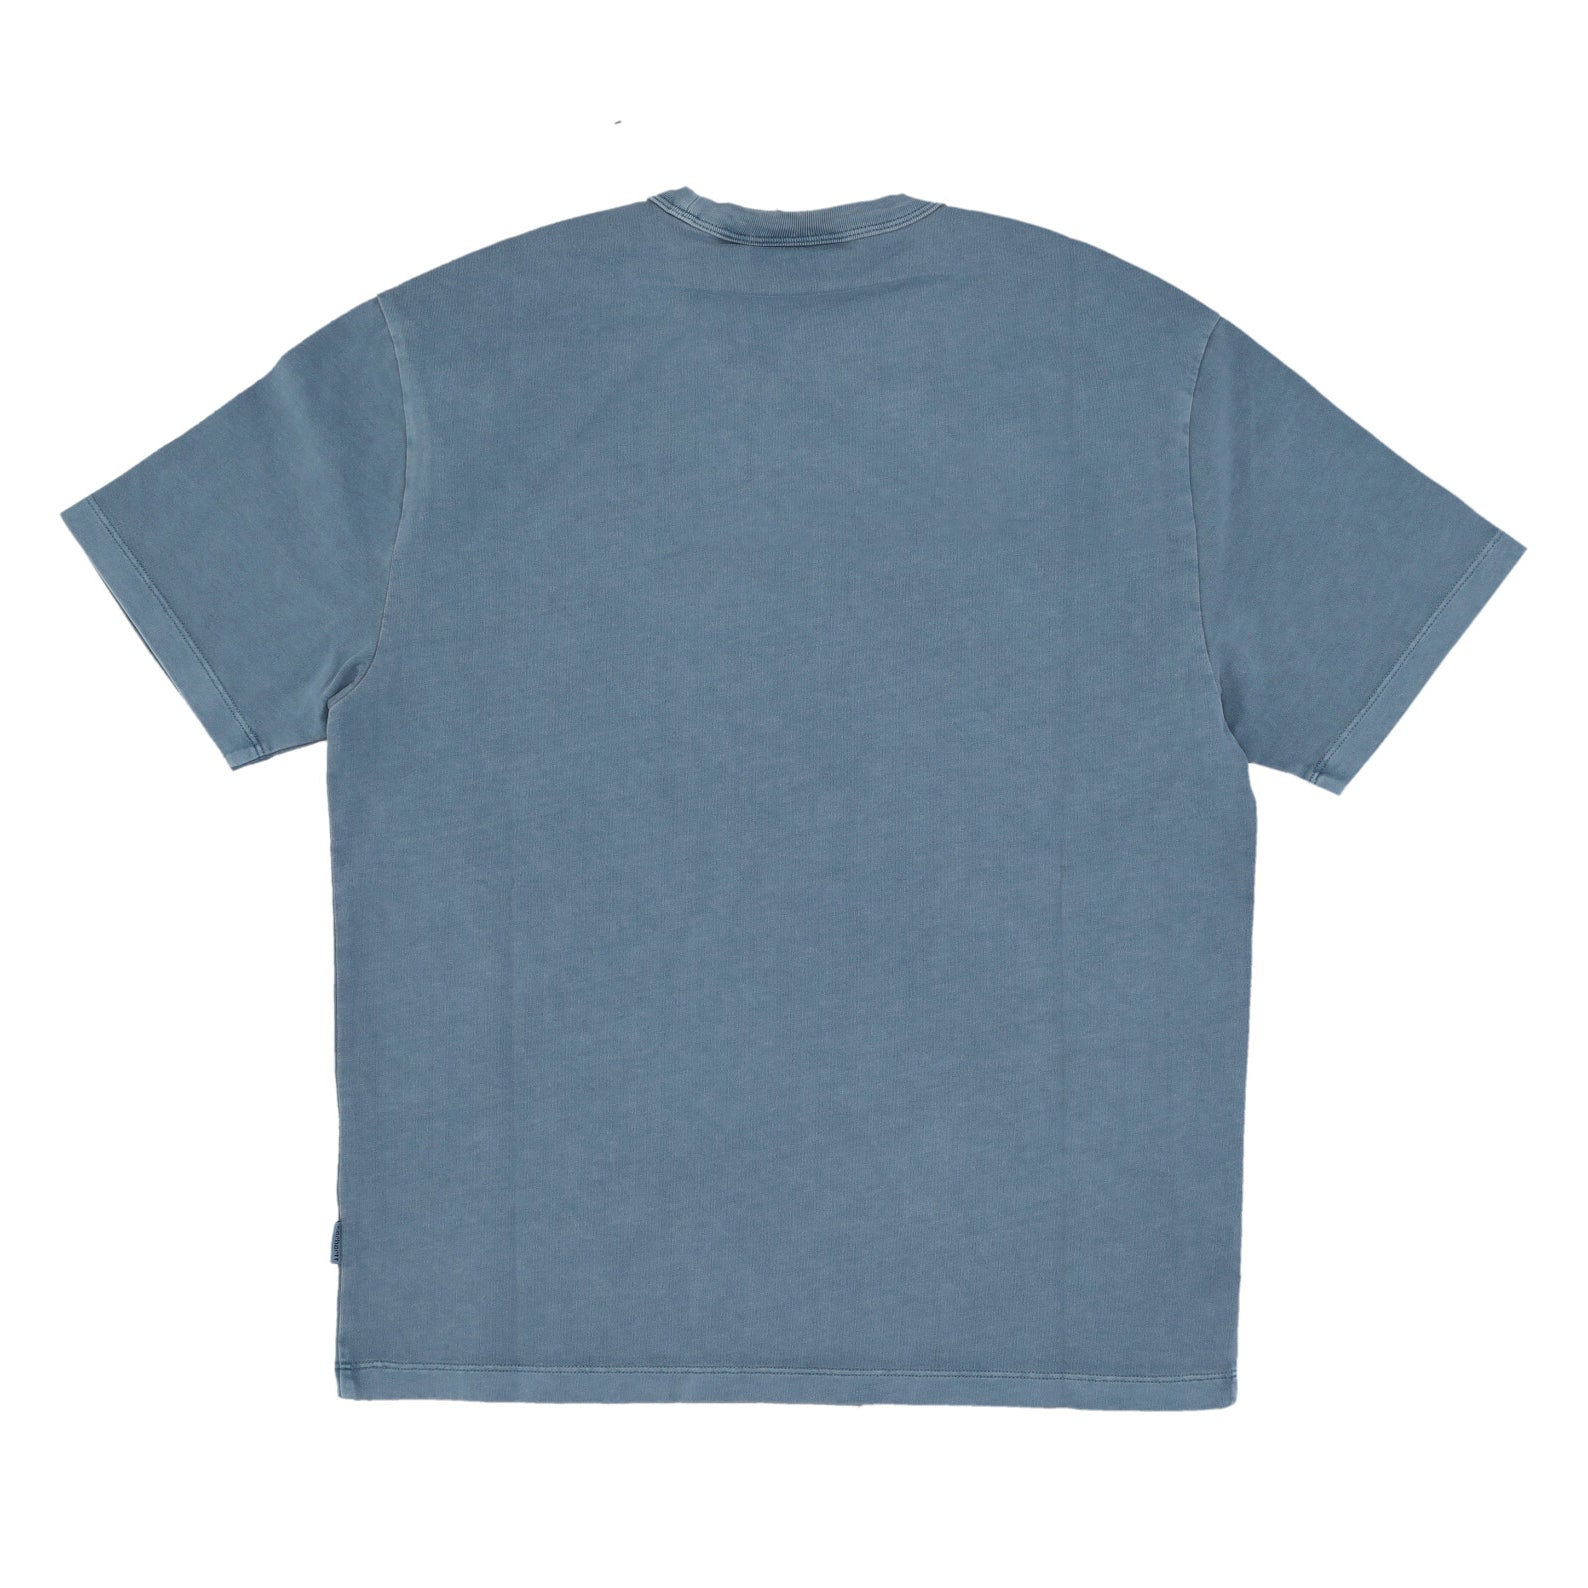 Maglietta Donna W Taos Tee Vancouver Blue Garment Dyed I032852.1Y1